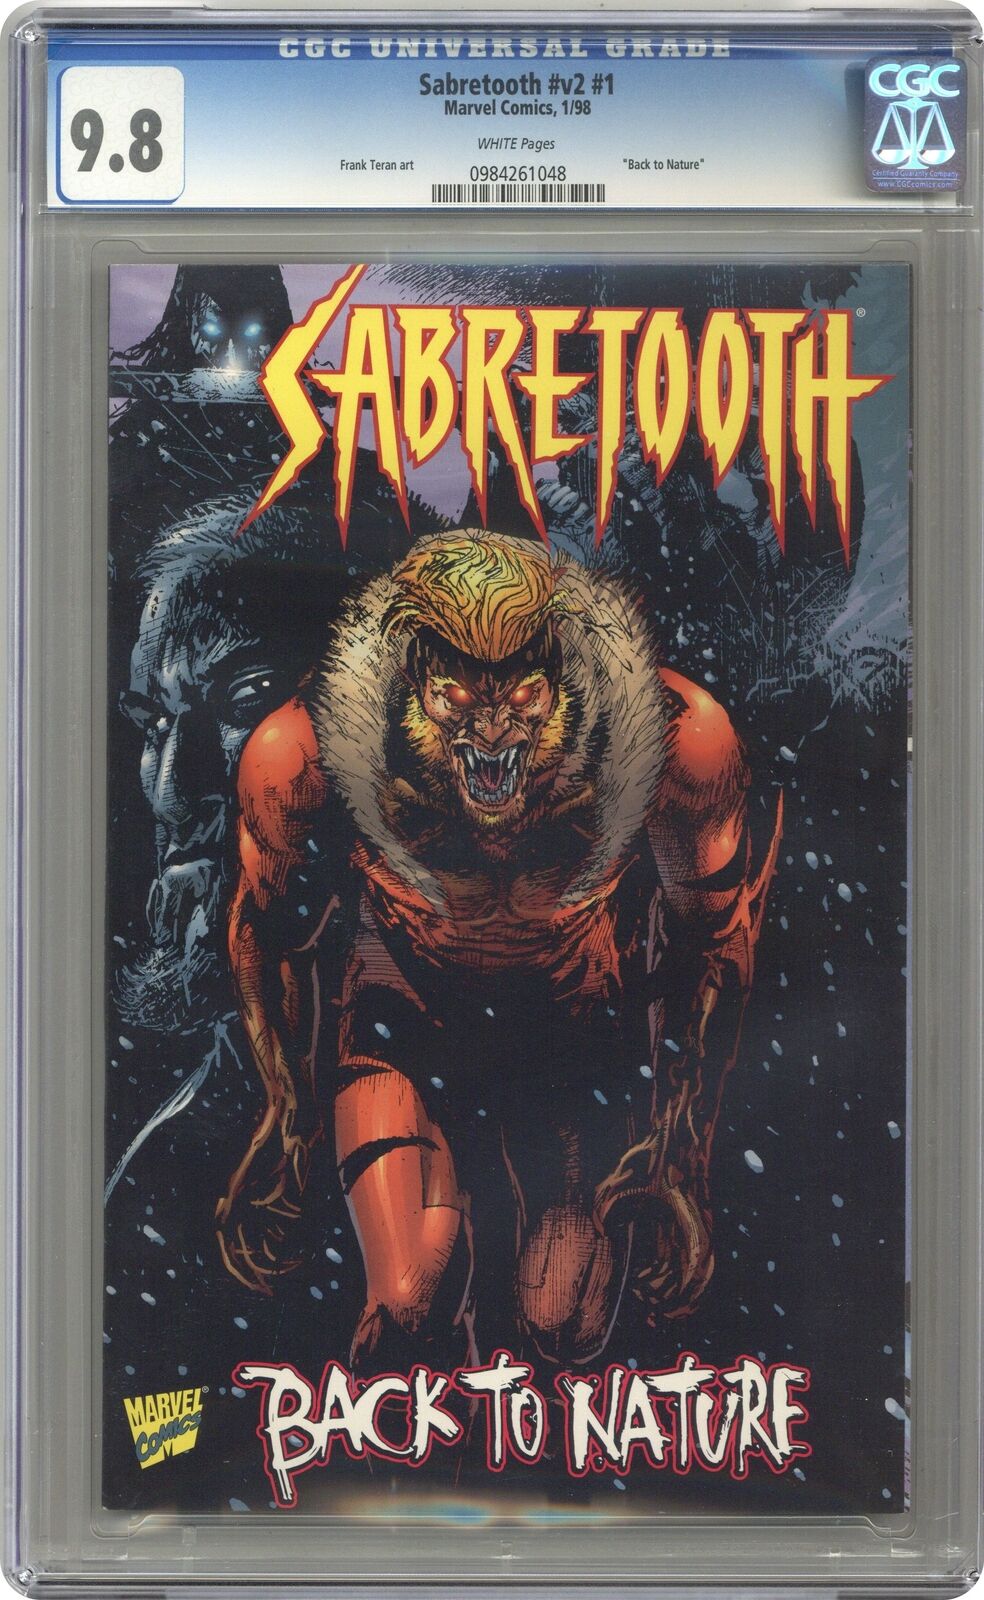 Sabretooth Back to Nature Special #1 CGC 9.8 1998 0984261048